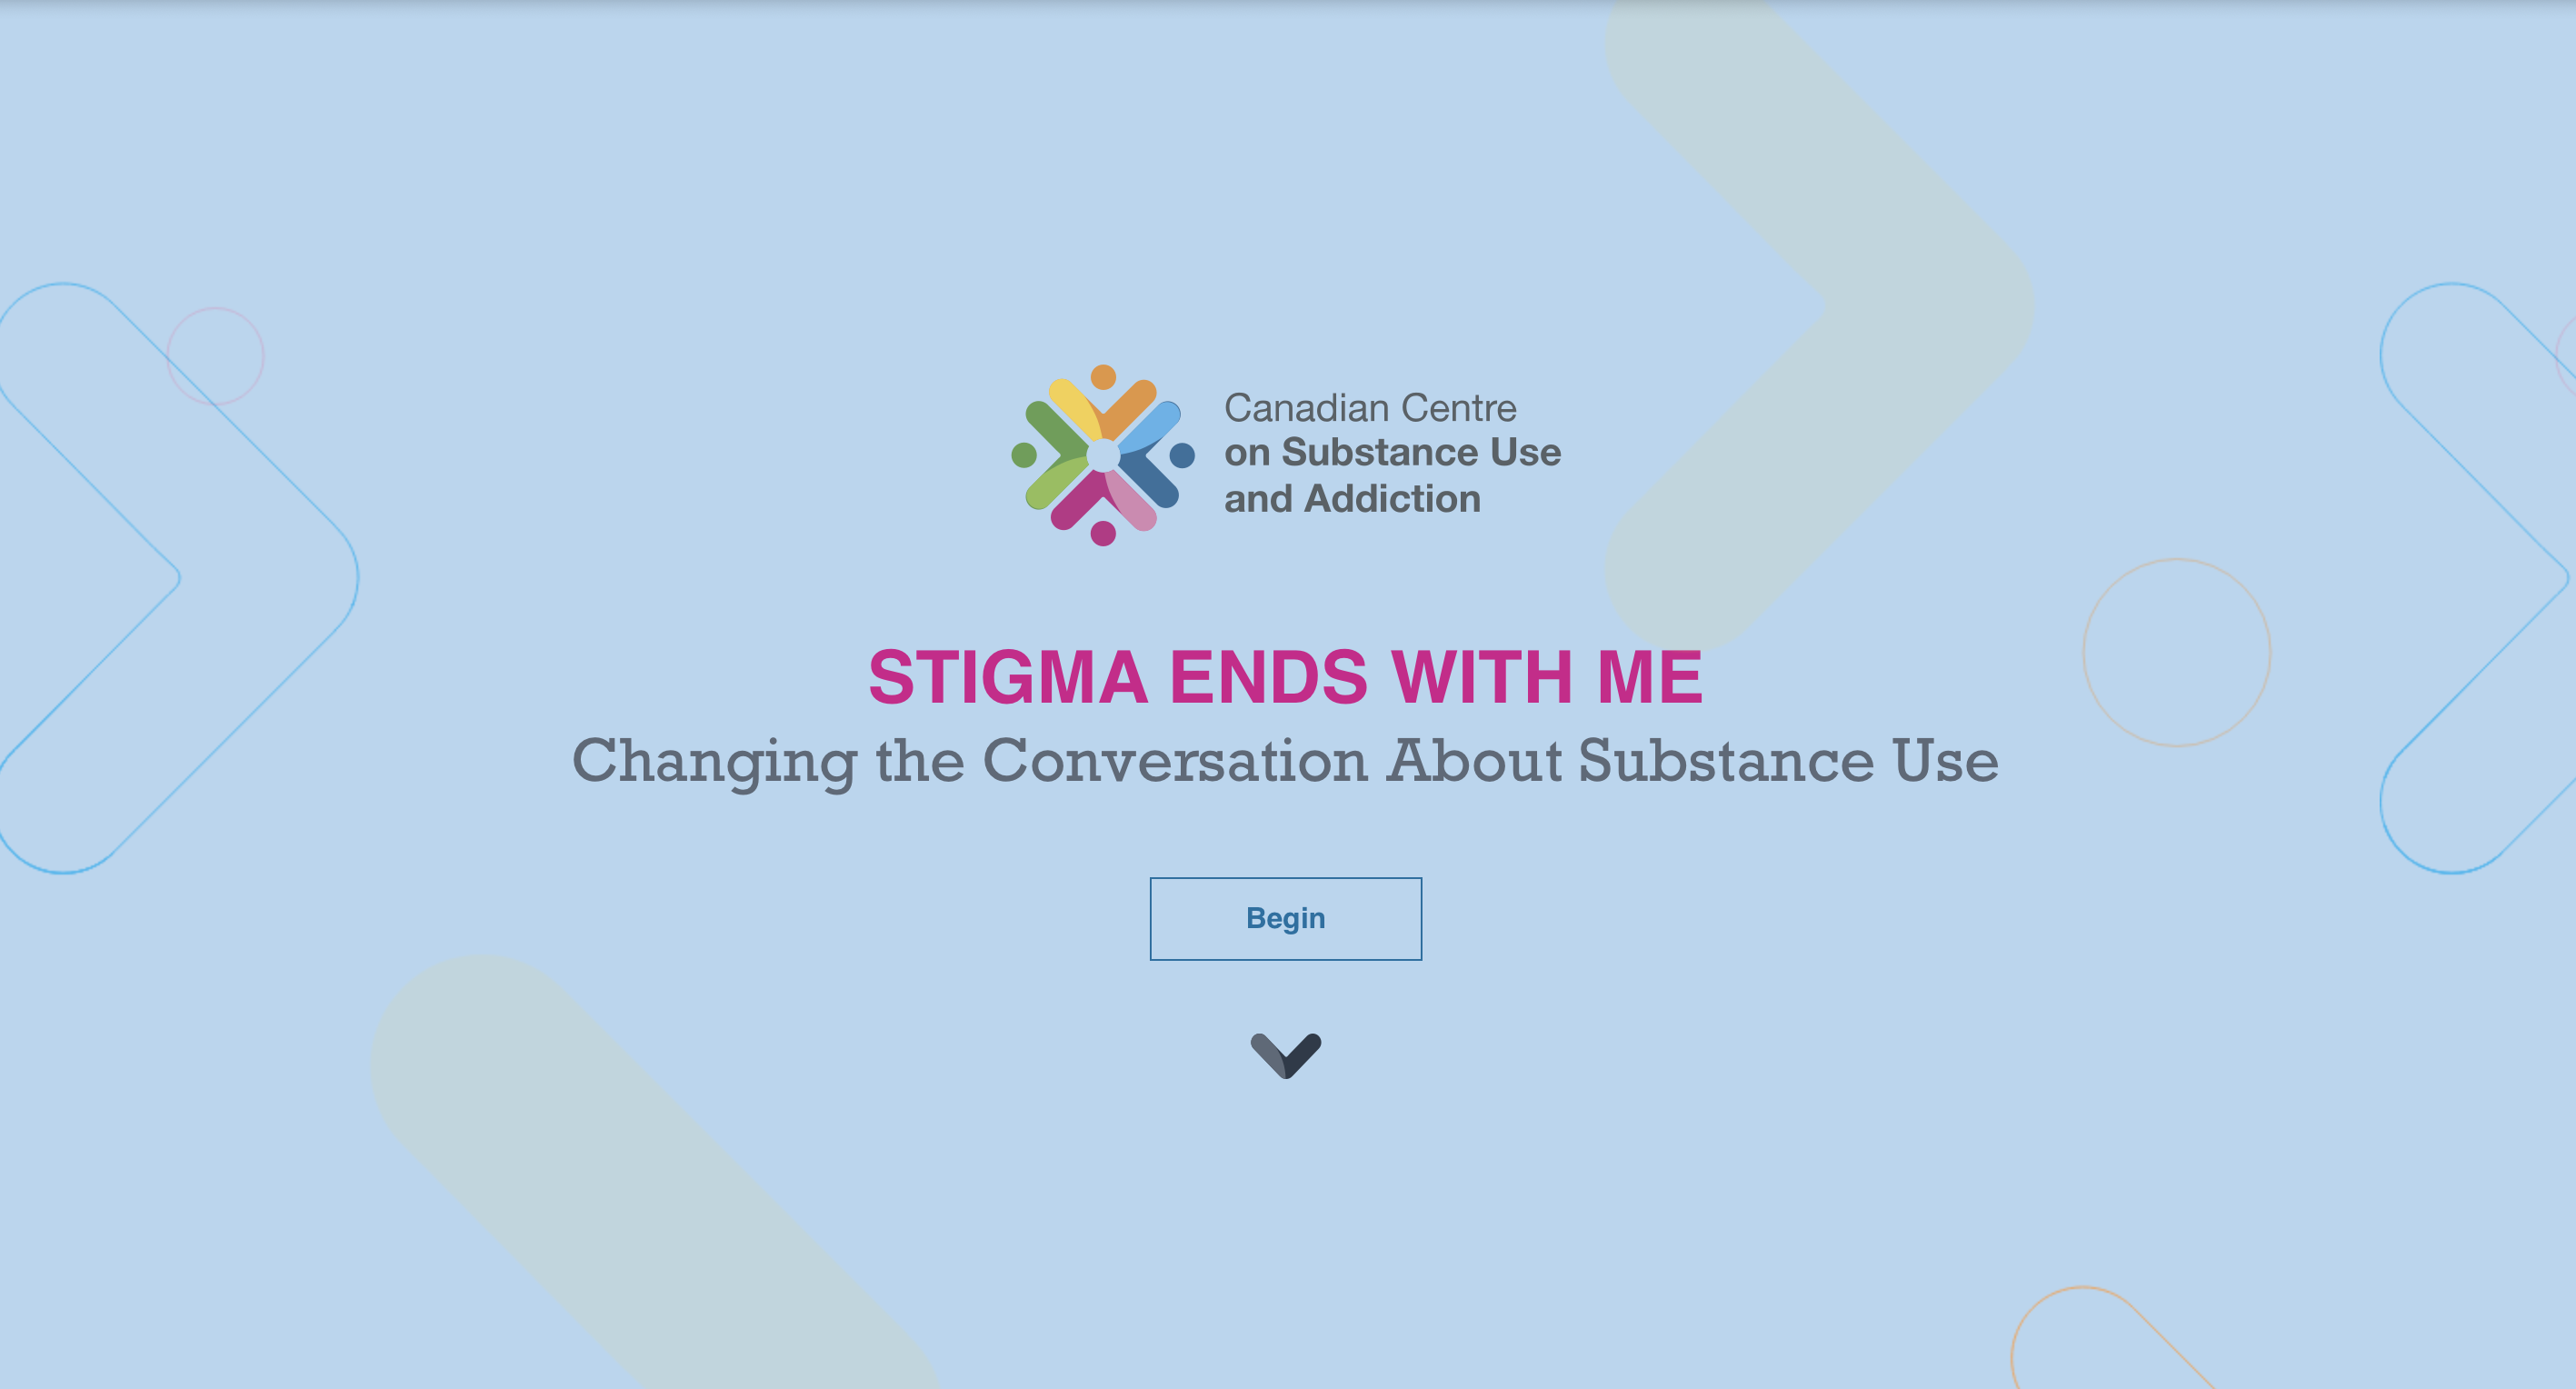 Stigma ends with me